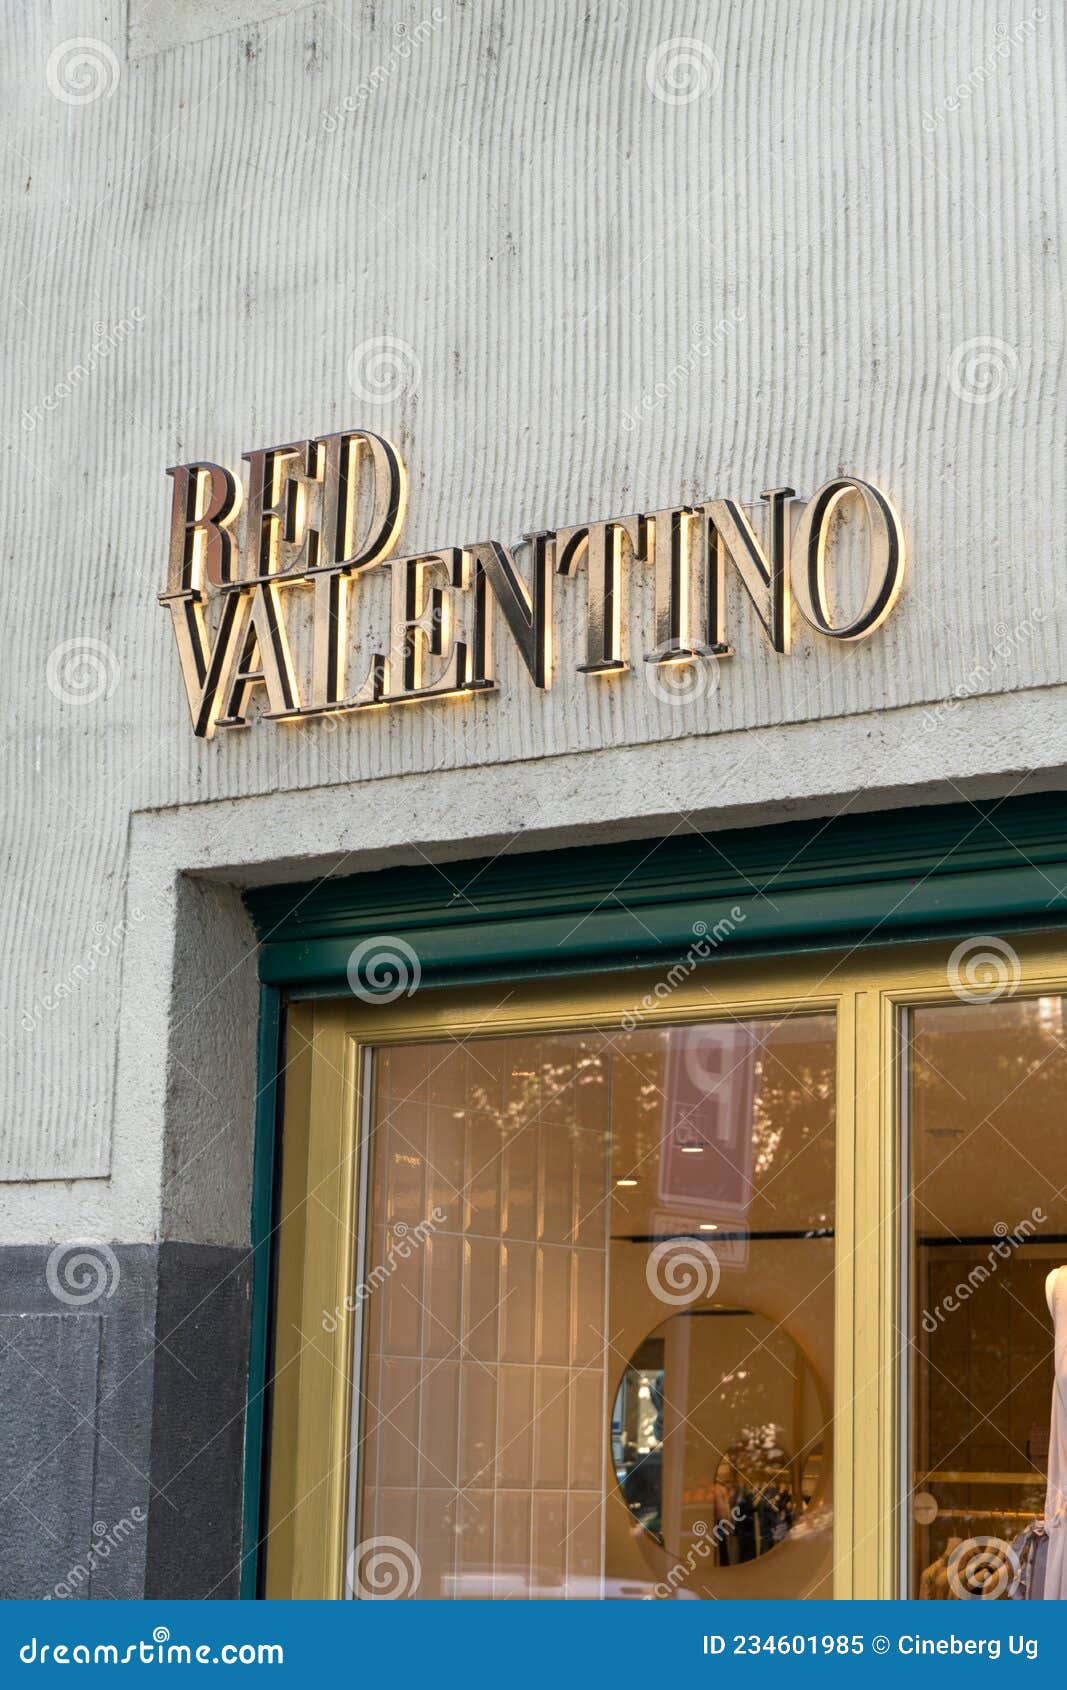 RED Valentino Fashion Store Editorial Image - Image of branding, clothing: